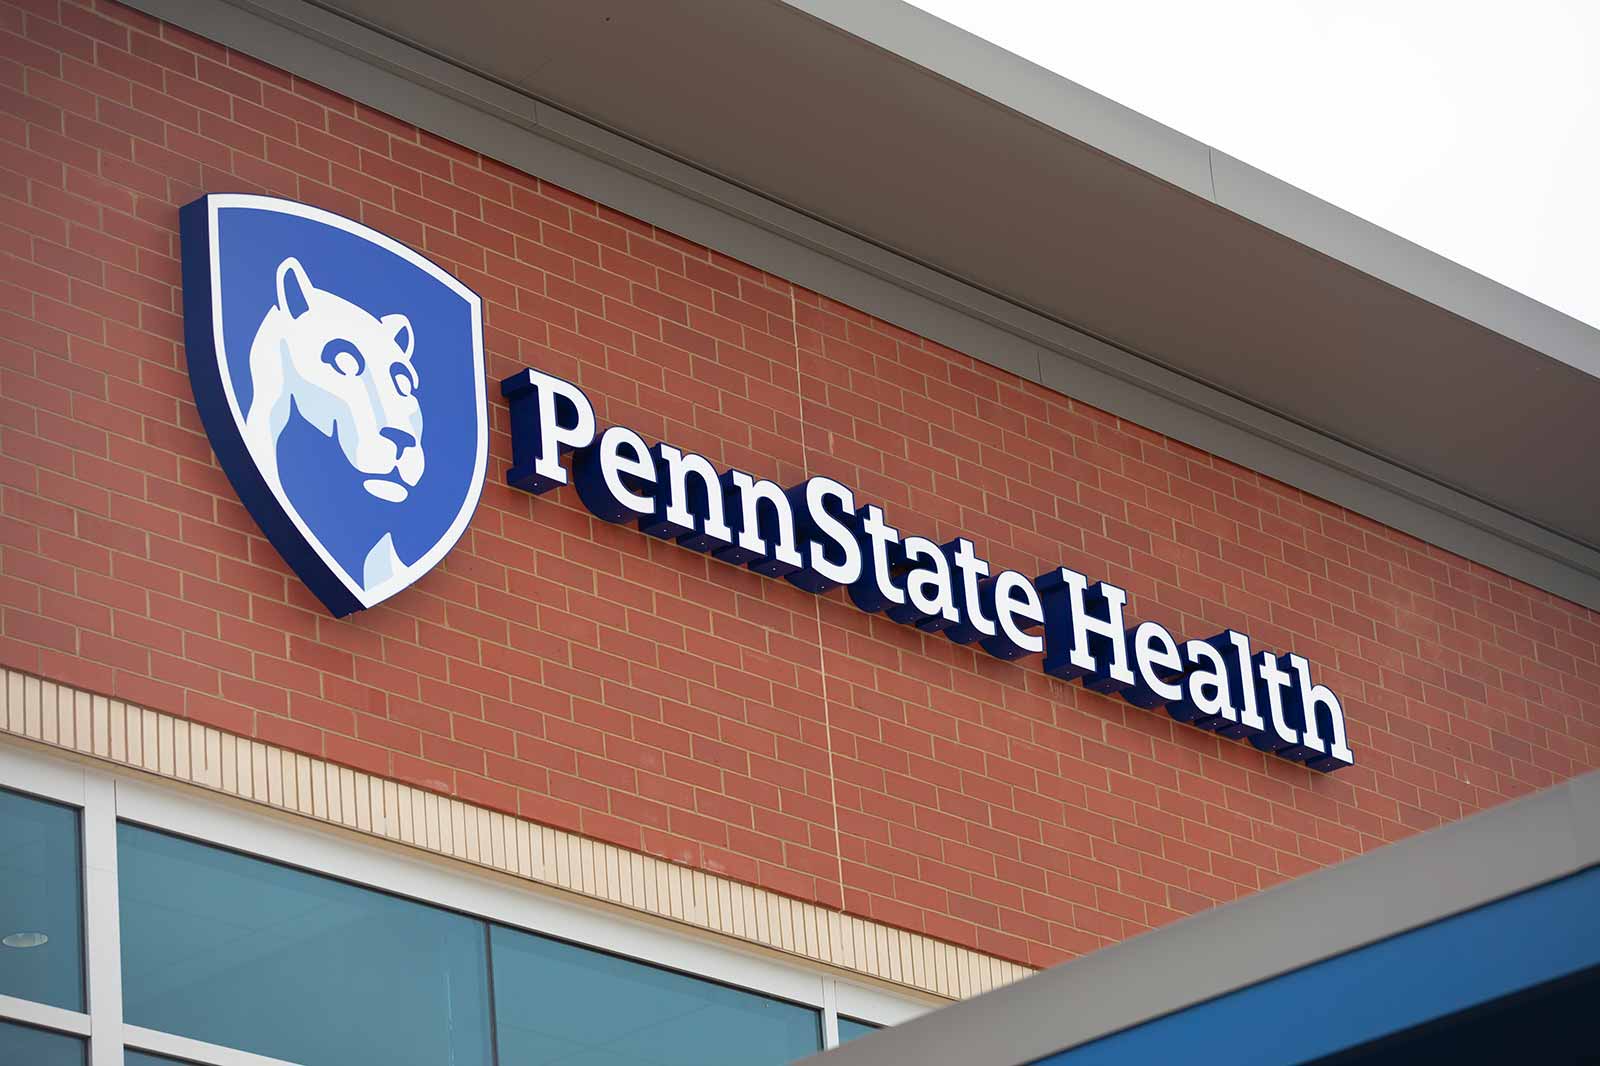 A close-view of the Penn State Health sign on the side a building.